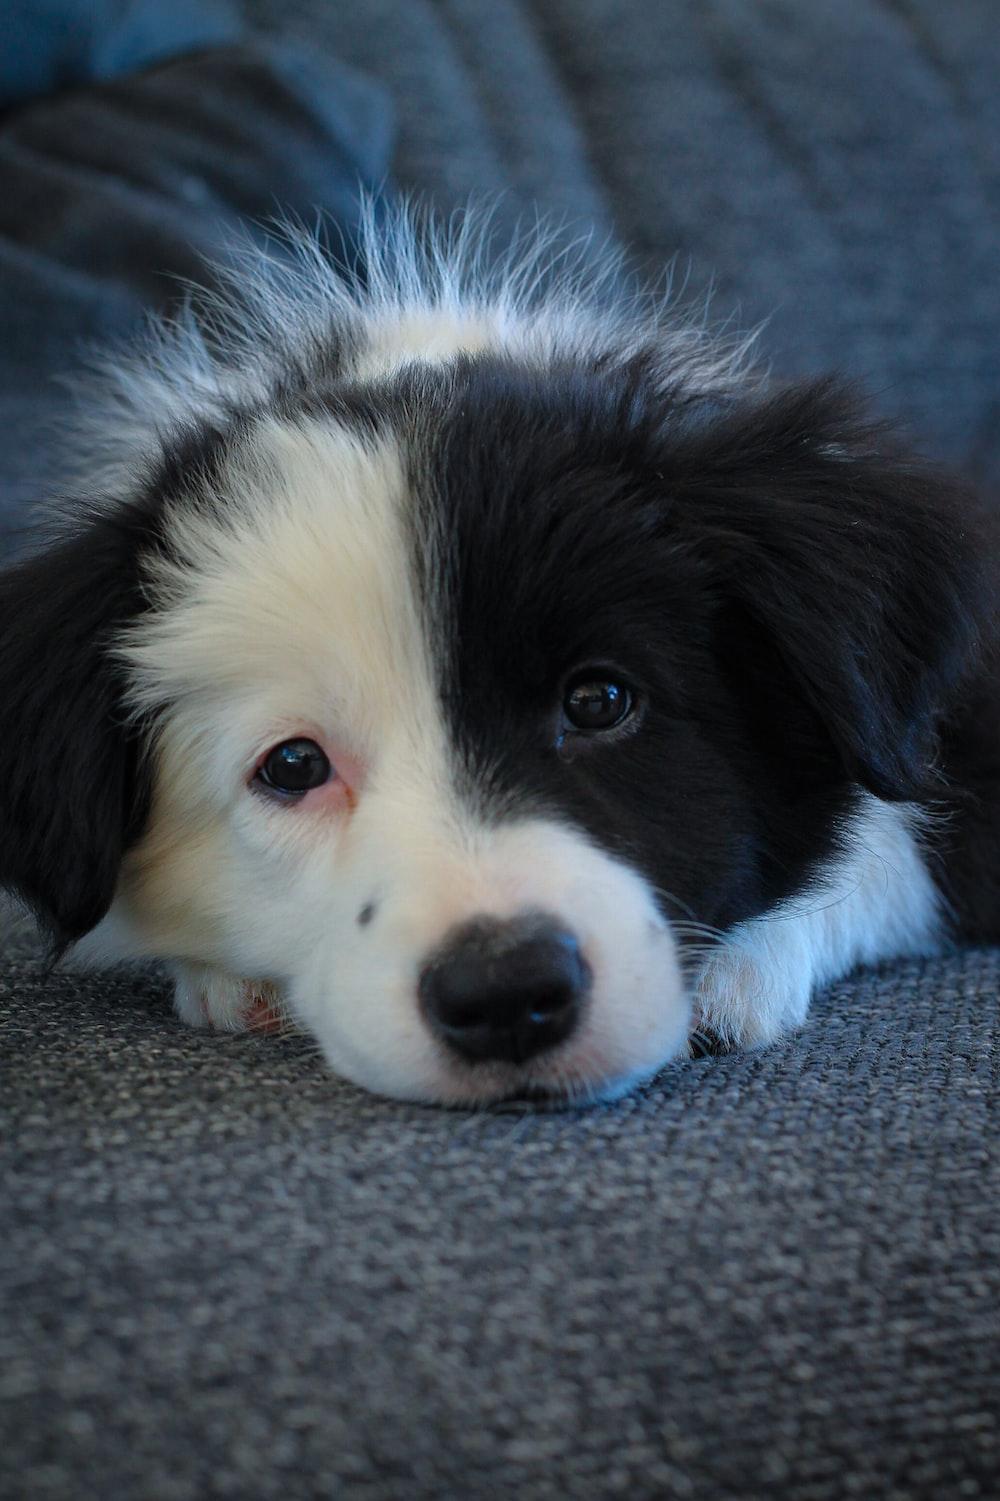 Black And White Border Collie Puppy Lying On Gray Carpet Photo